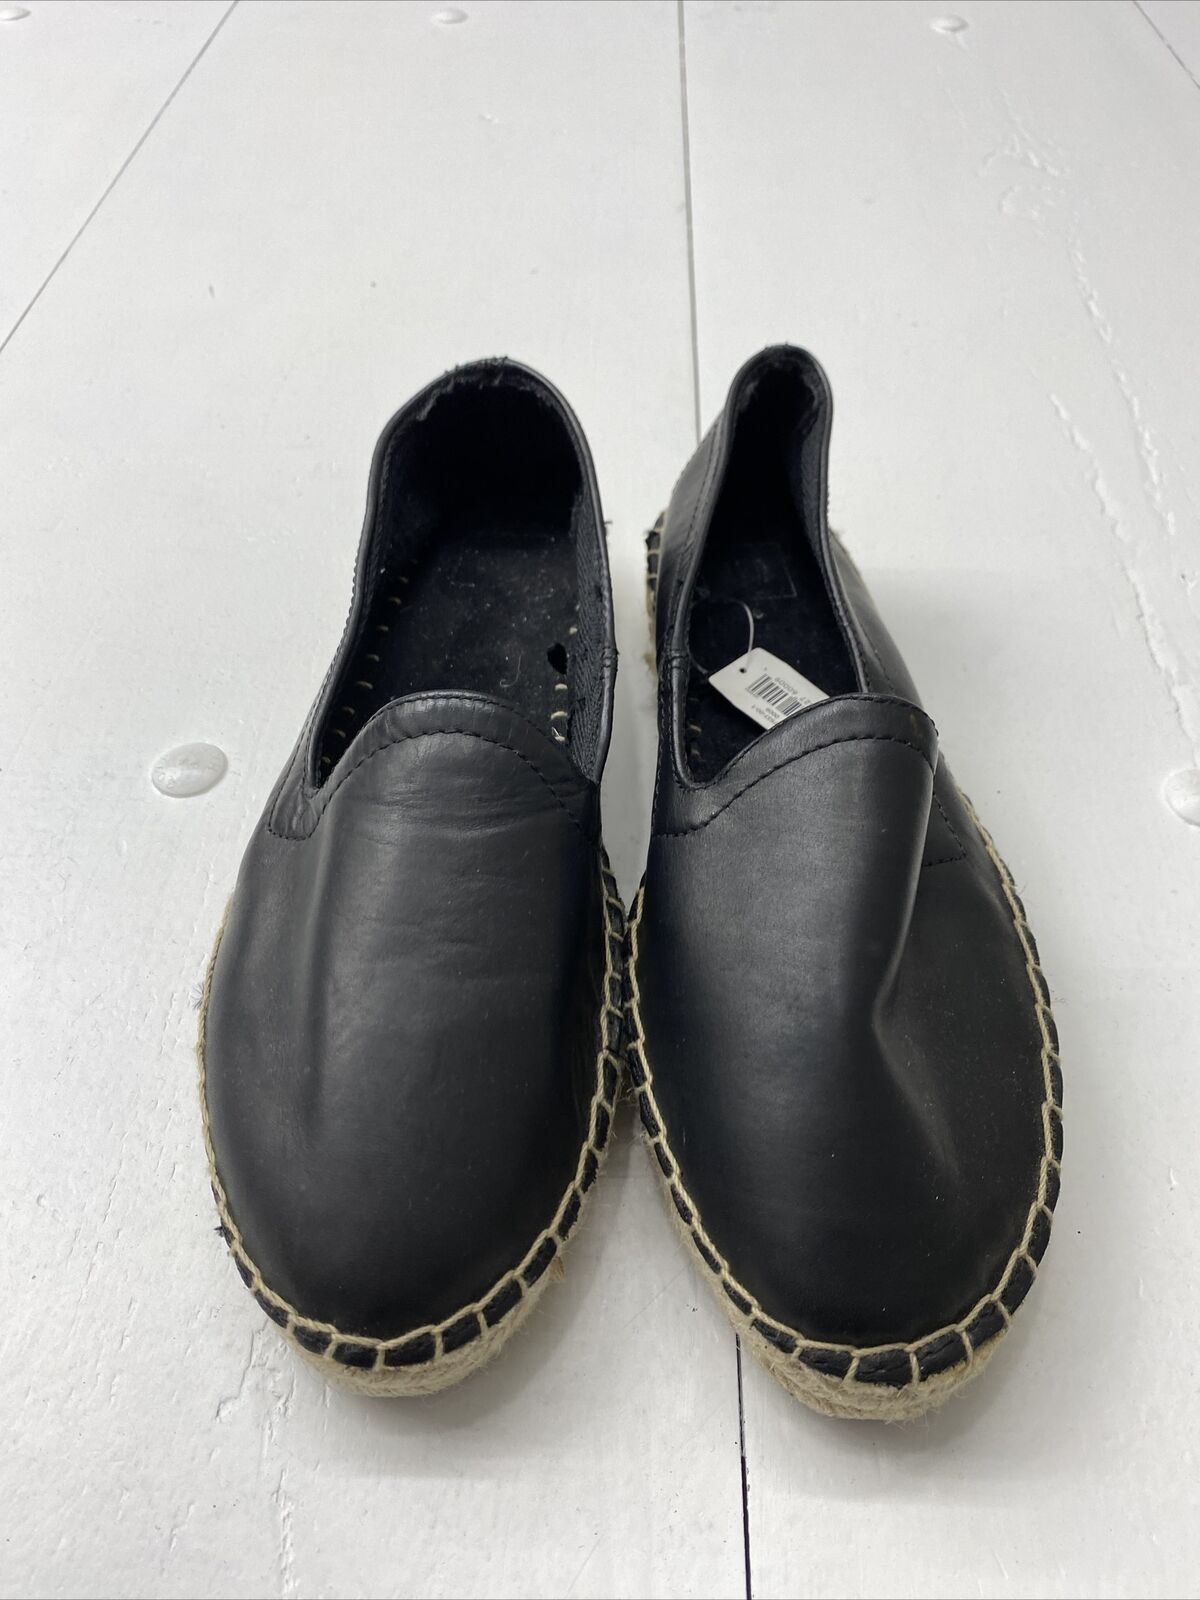 Gap Black Leather Espadrille Loafers Slip On Shoes Round Toe Women's S -  beyond exchange